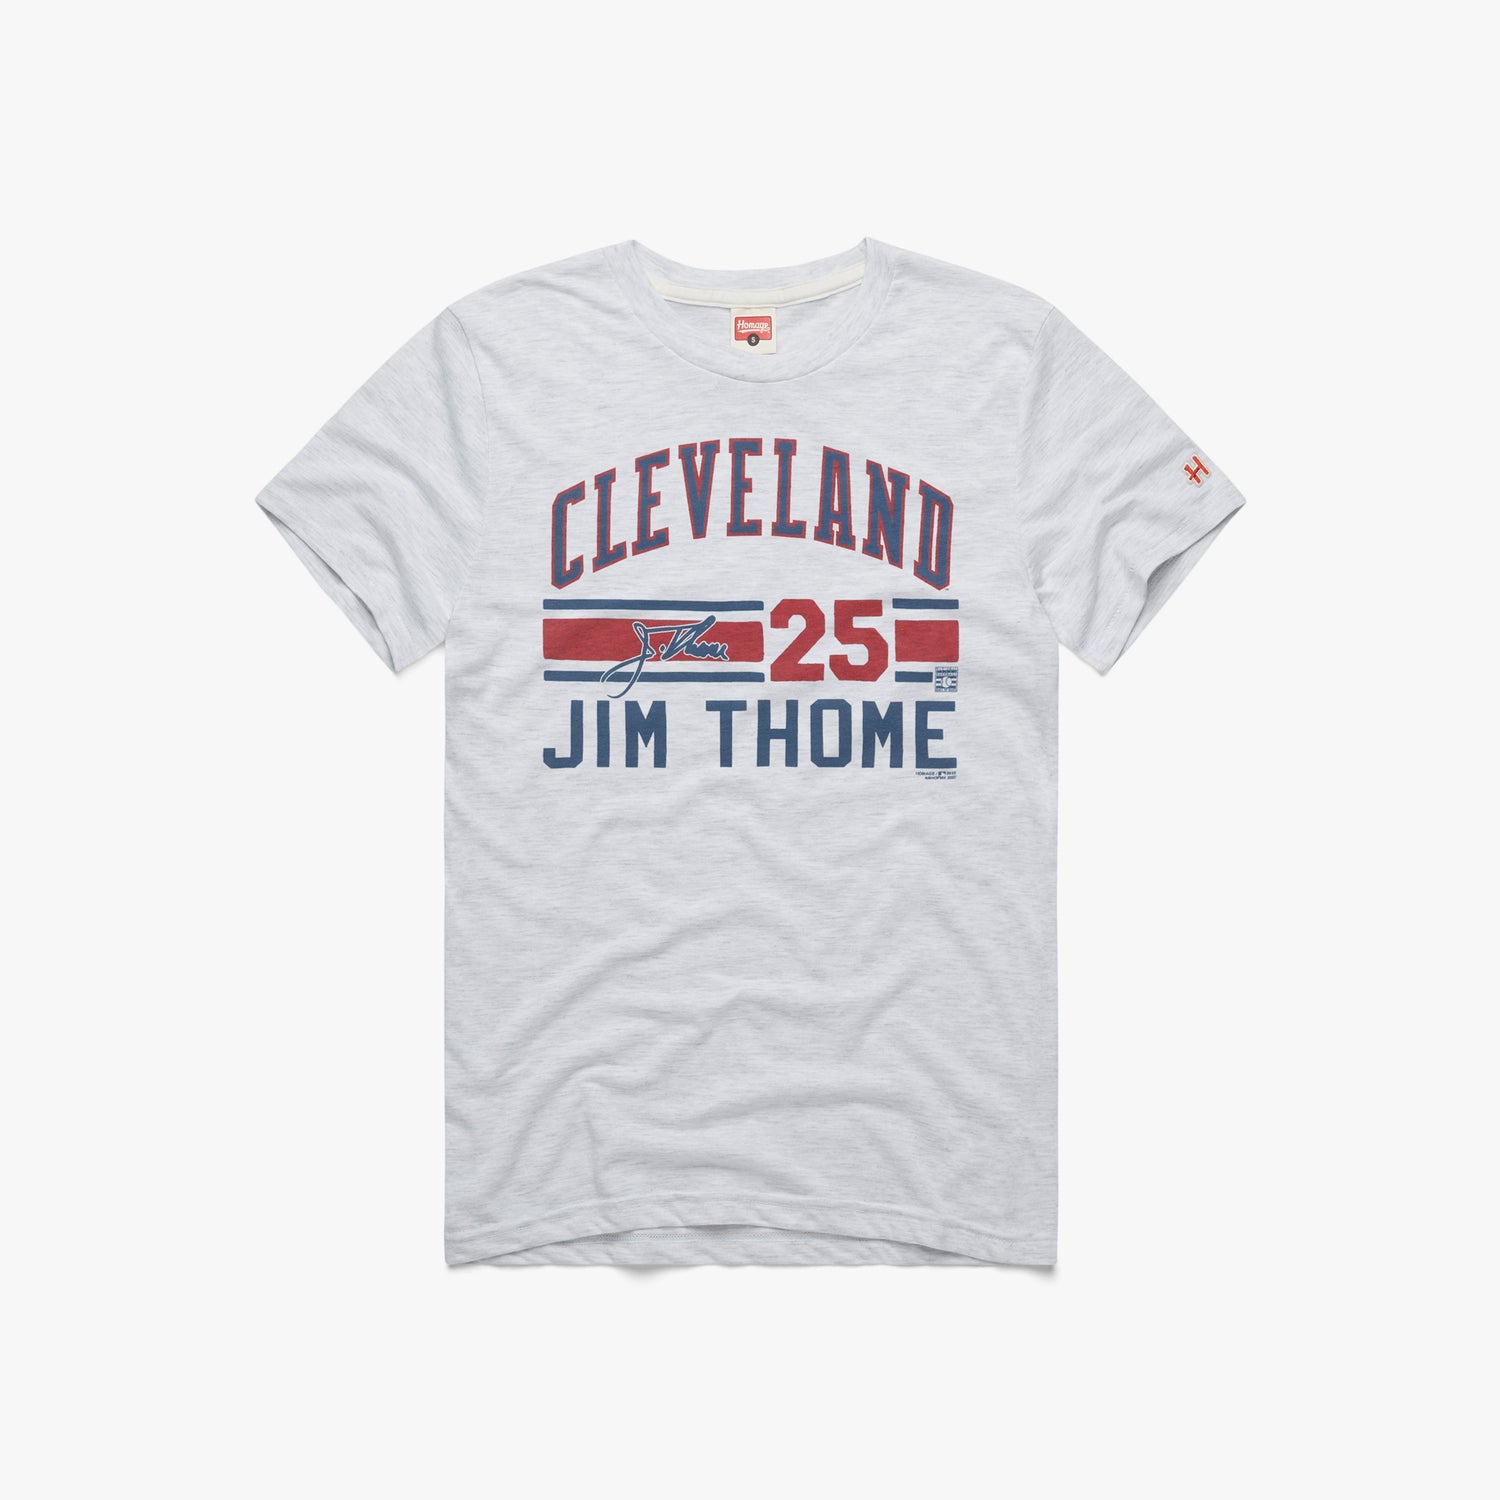 Jim Thome MLB Jerseys for sale